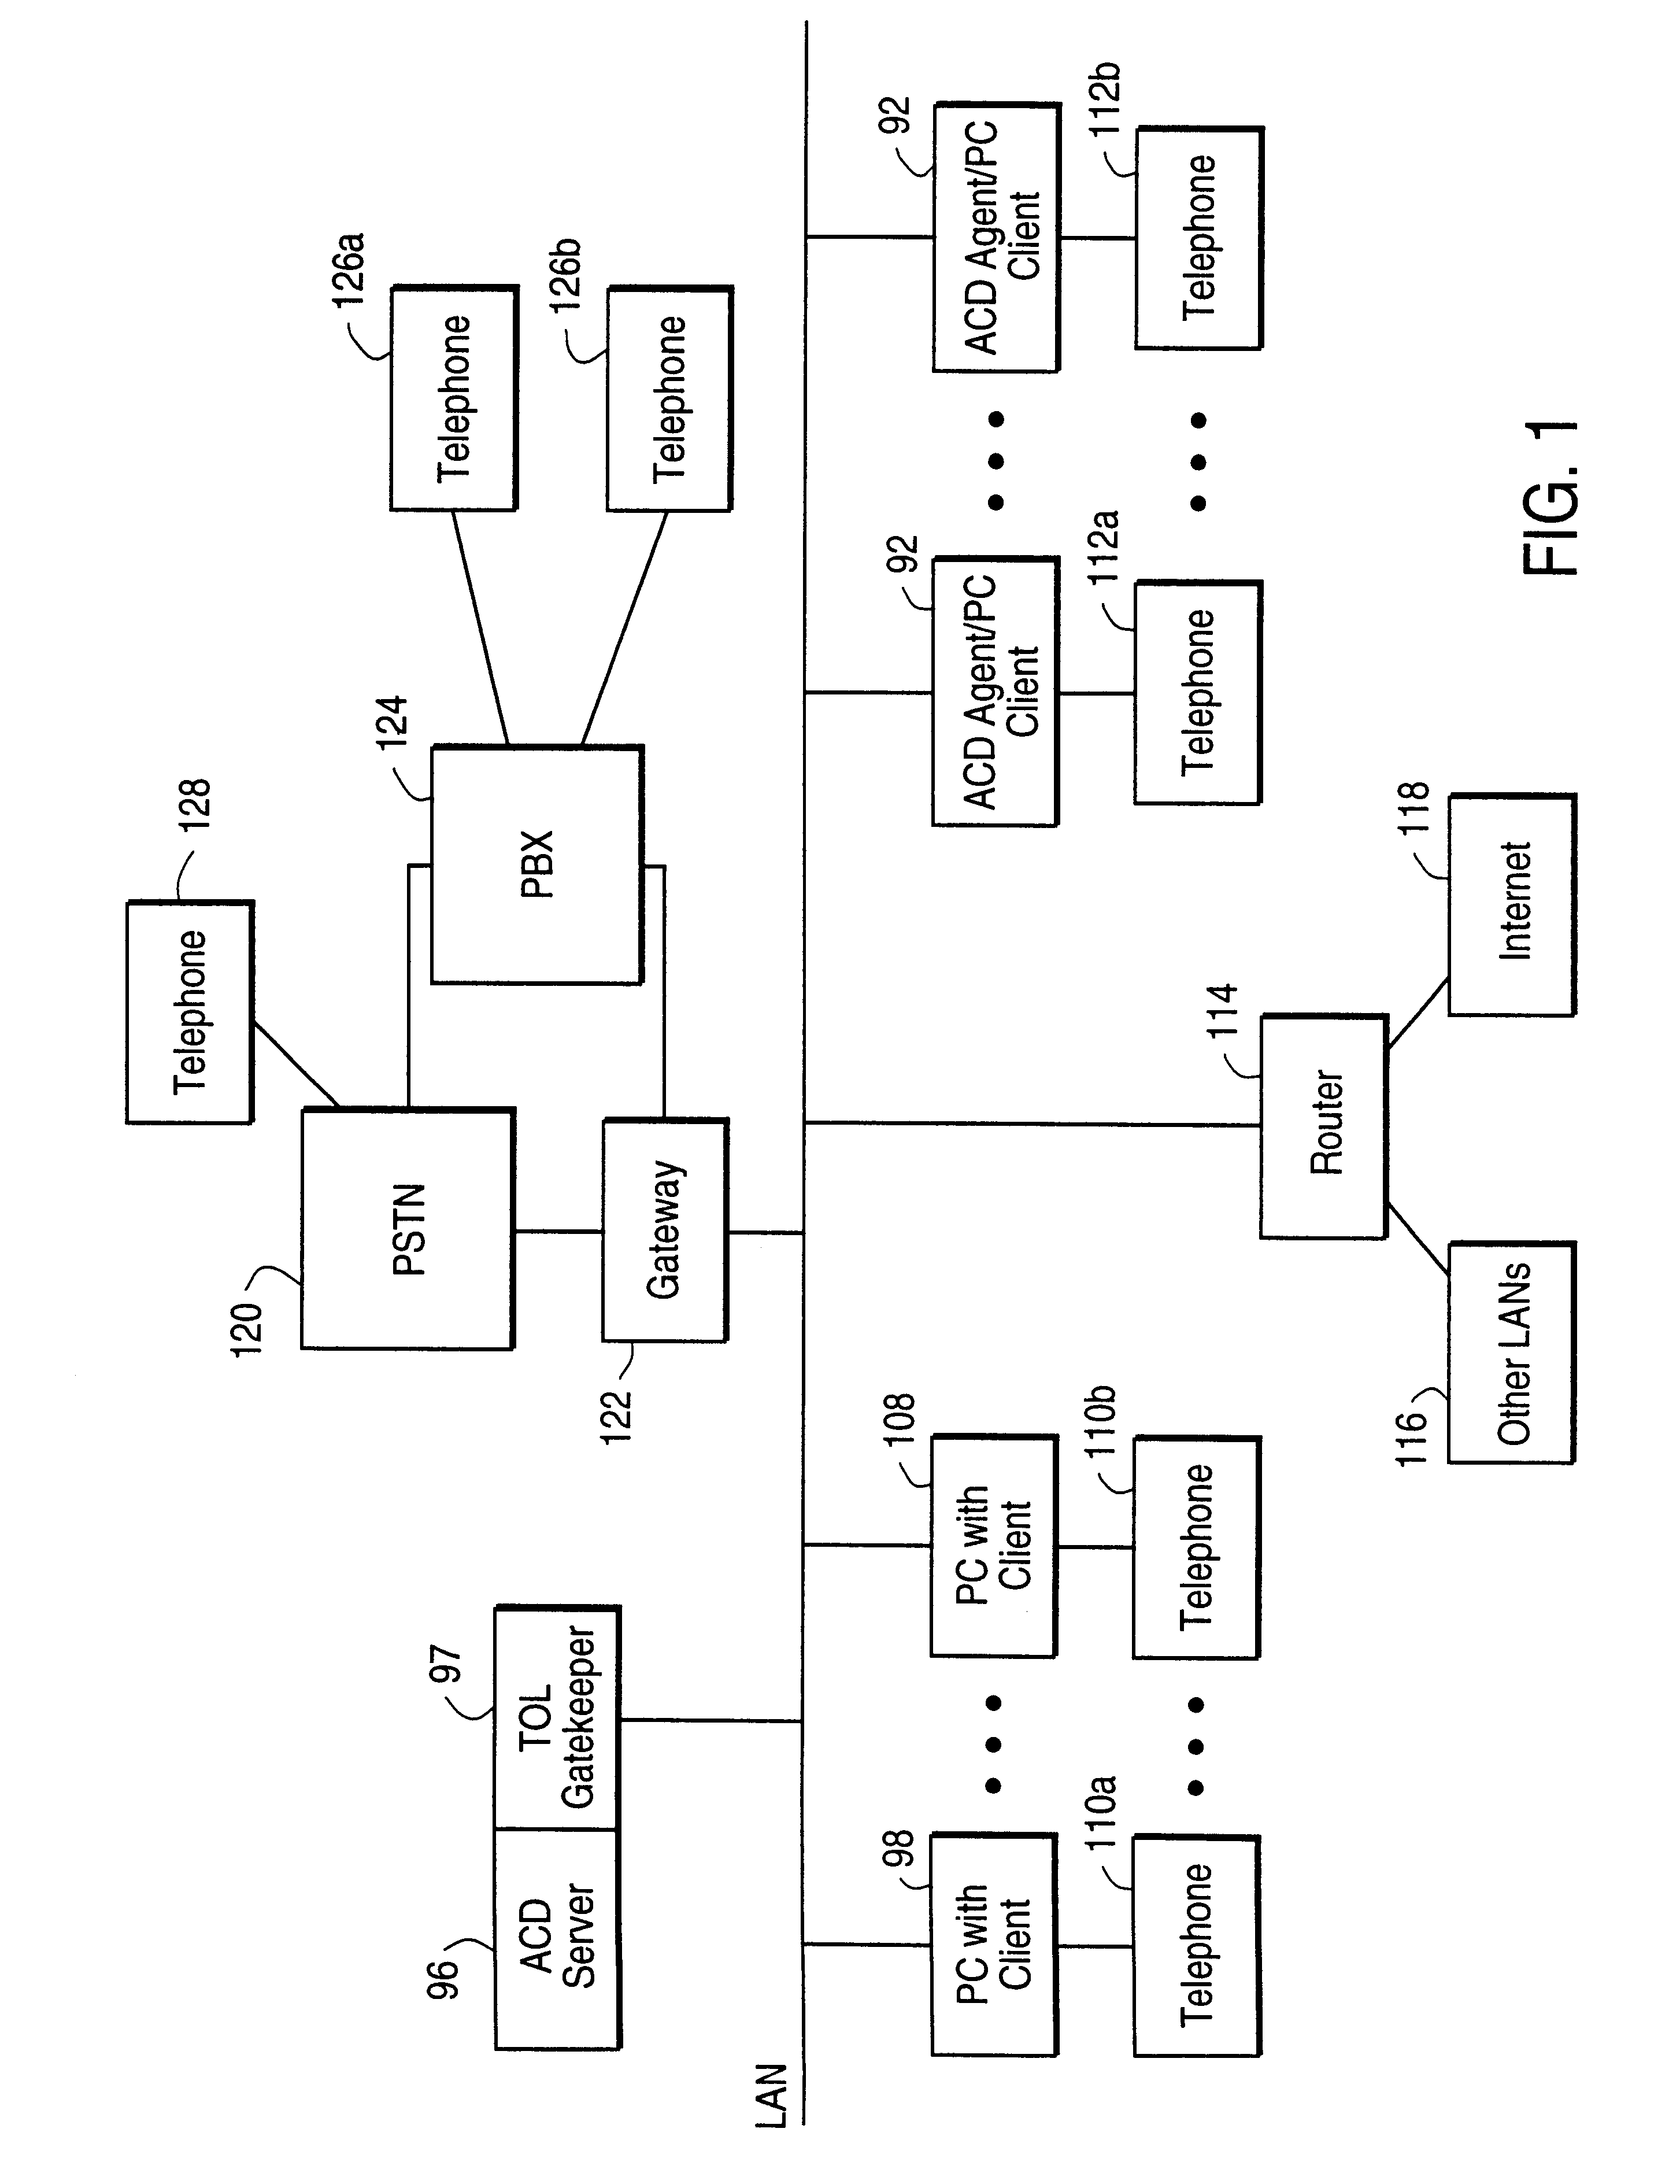 Apparatus and method for music-on-hold delivery on a communication system